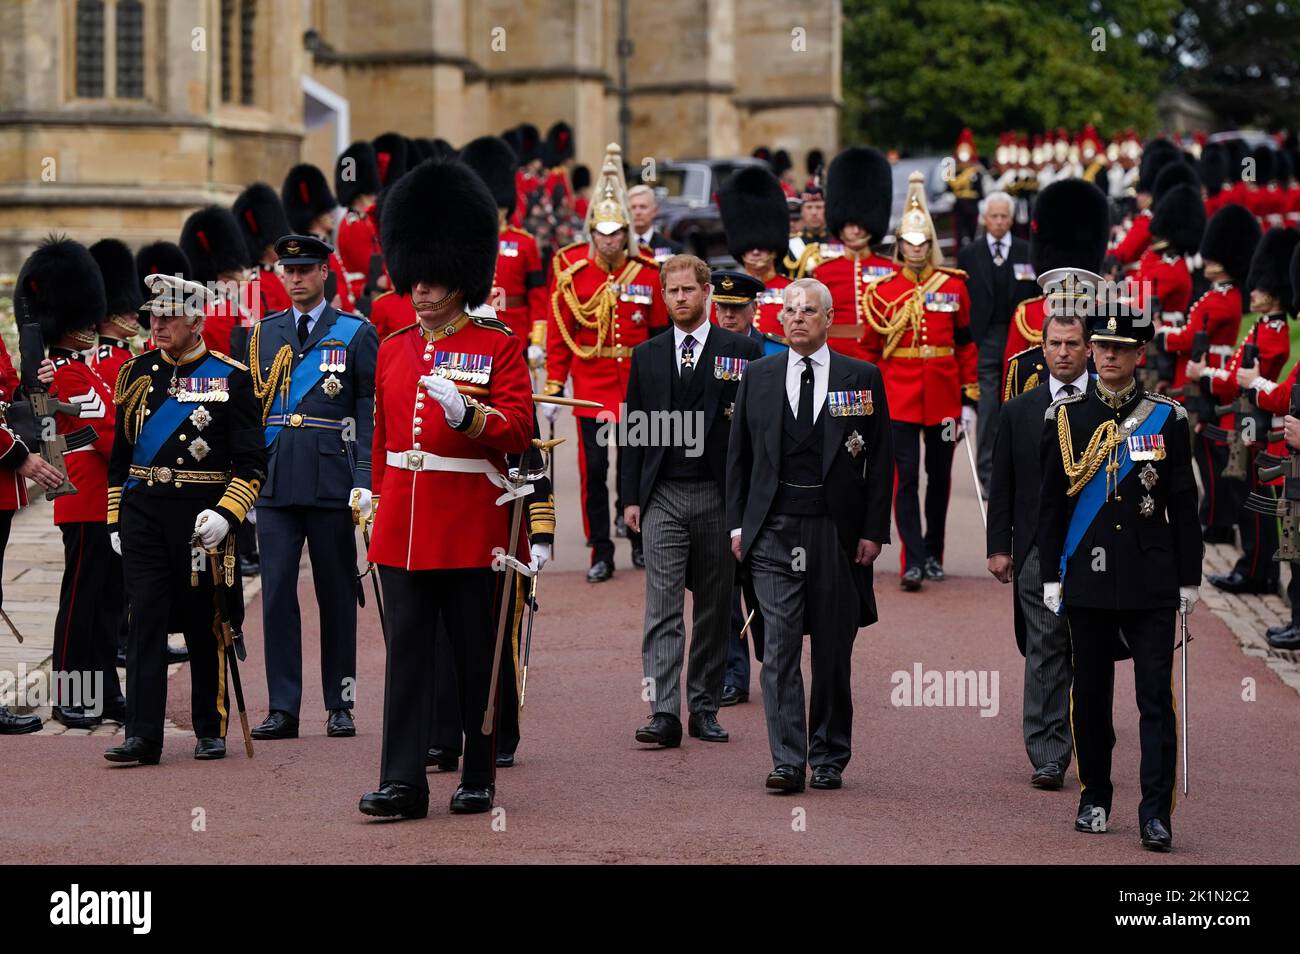 (left to right) King Charles III, the Prince of Wales, the Duke of Sussex, the Duke of York, Peter Phillips and the Earl of Wessex follow the State Hearse carries the coffin of Queen Elizabeth II, draped in the Royal Standard with the Imperial State Crown and the Sovereign's Orb and Sceptre, during the Ceremonial Procession through Windsor Castle to a Committal Service at St George's Chapel. Picture date: Monday September 19, 2022. Stock Photo